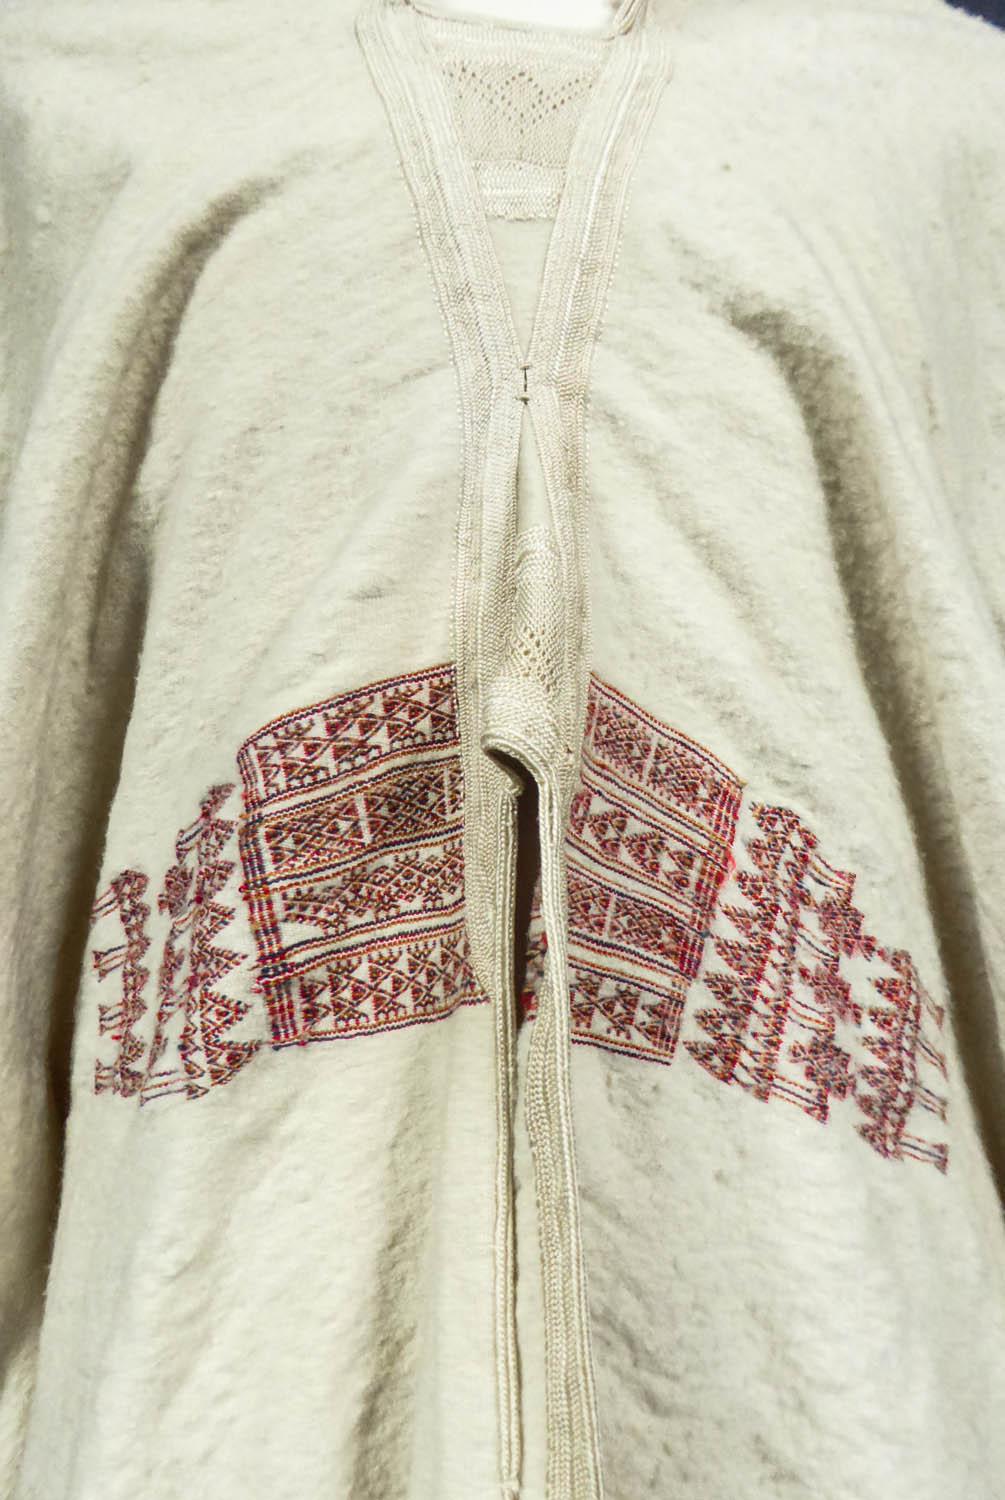 Circa 1950
Tunisia

Wide burnous cape in ivory woven wool from Tunisia dating back to the 1950s. Thick handmade downy woven wool forming a very large hooded cape. Interesting embroidery work in trimmings of cream silk threads on the front of the